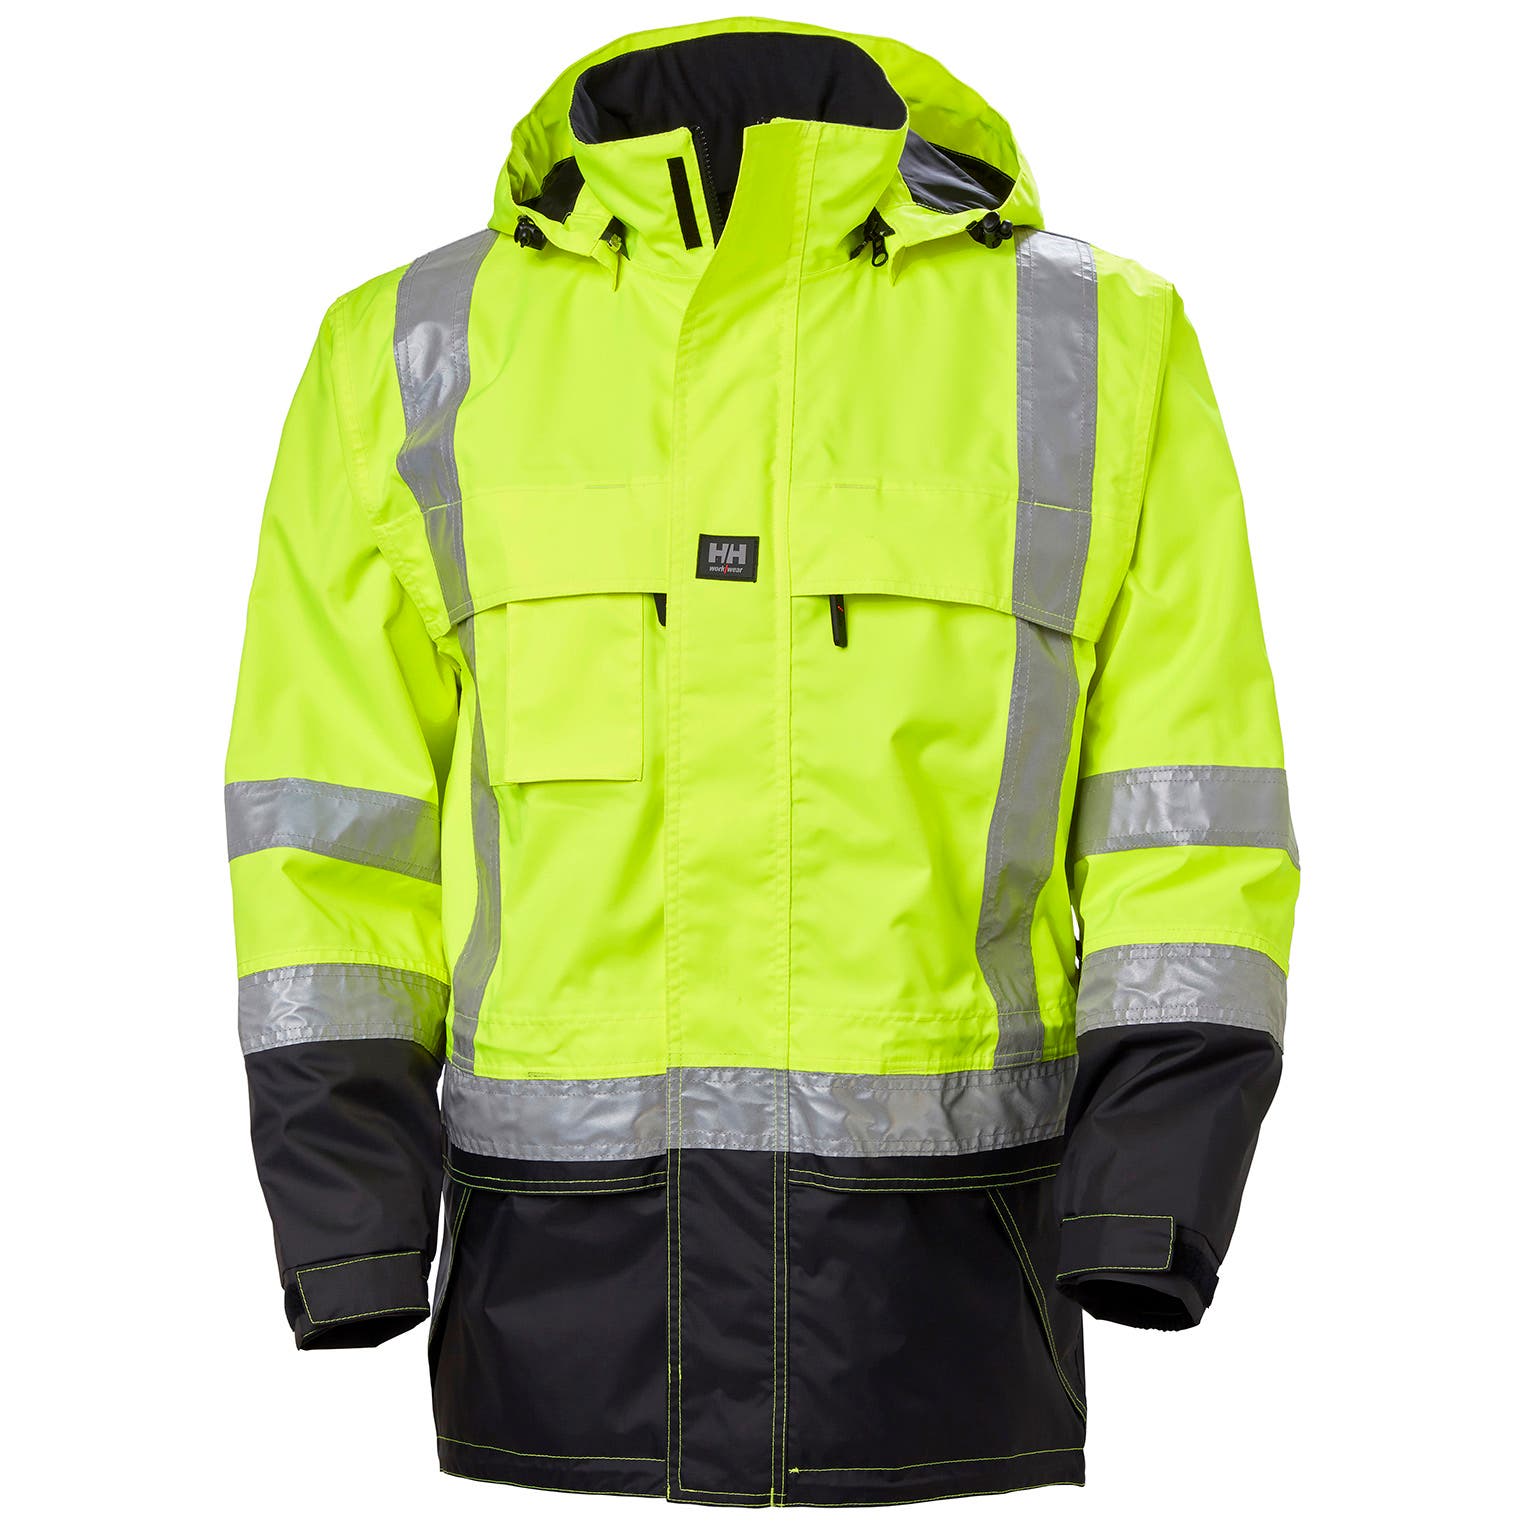 Helly Hansen Men's Potsdam Oxford Polyester ANSI Jacket in Yellow from the front